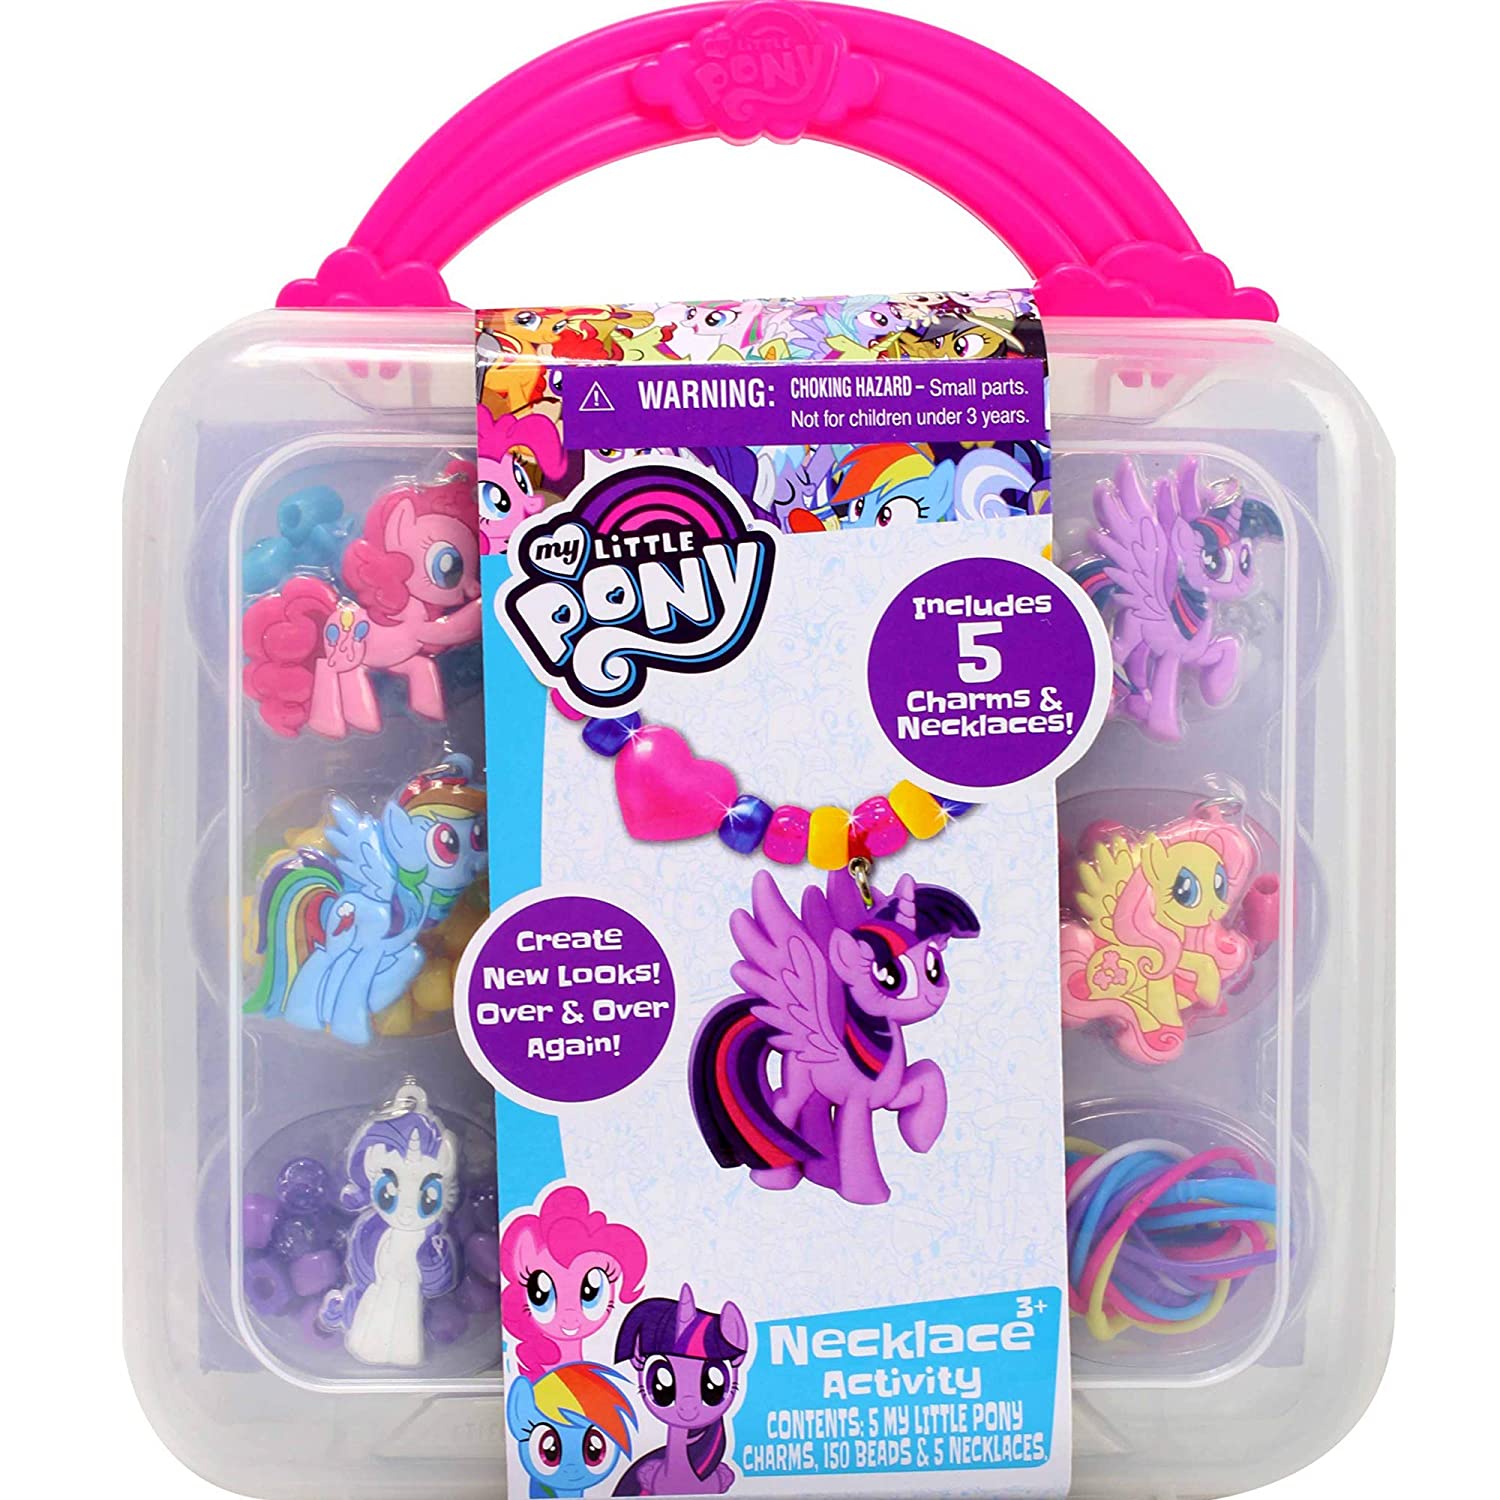 Top 11 Best My Little Pony Toys Reviews in 2022 4